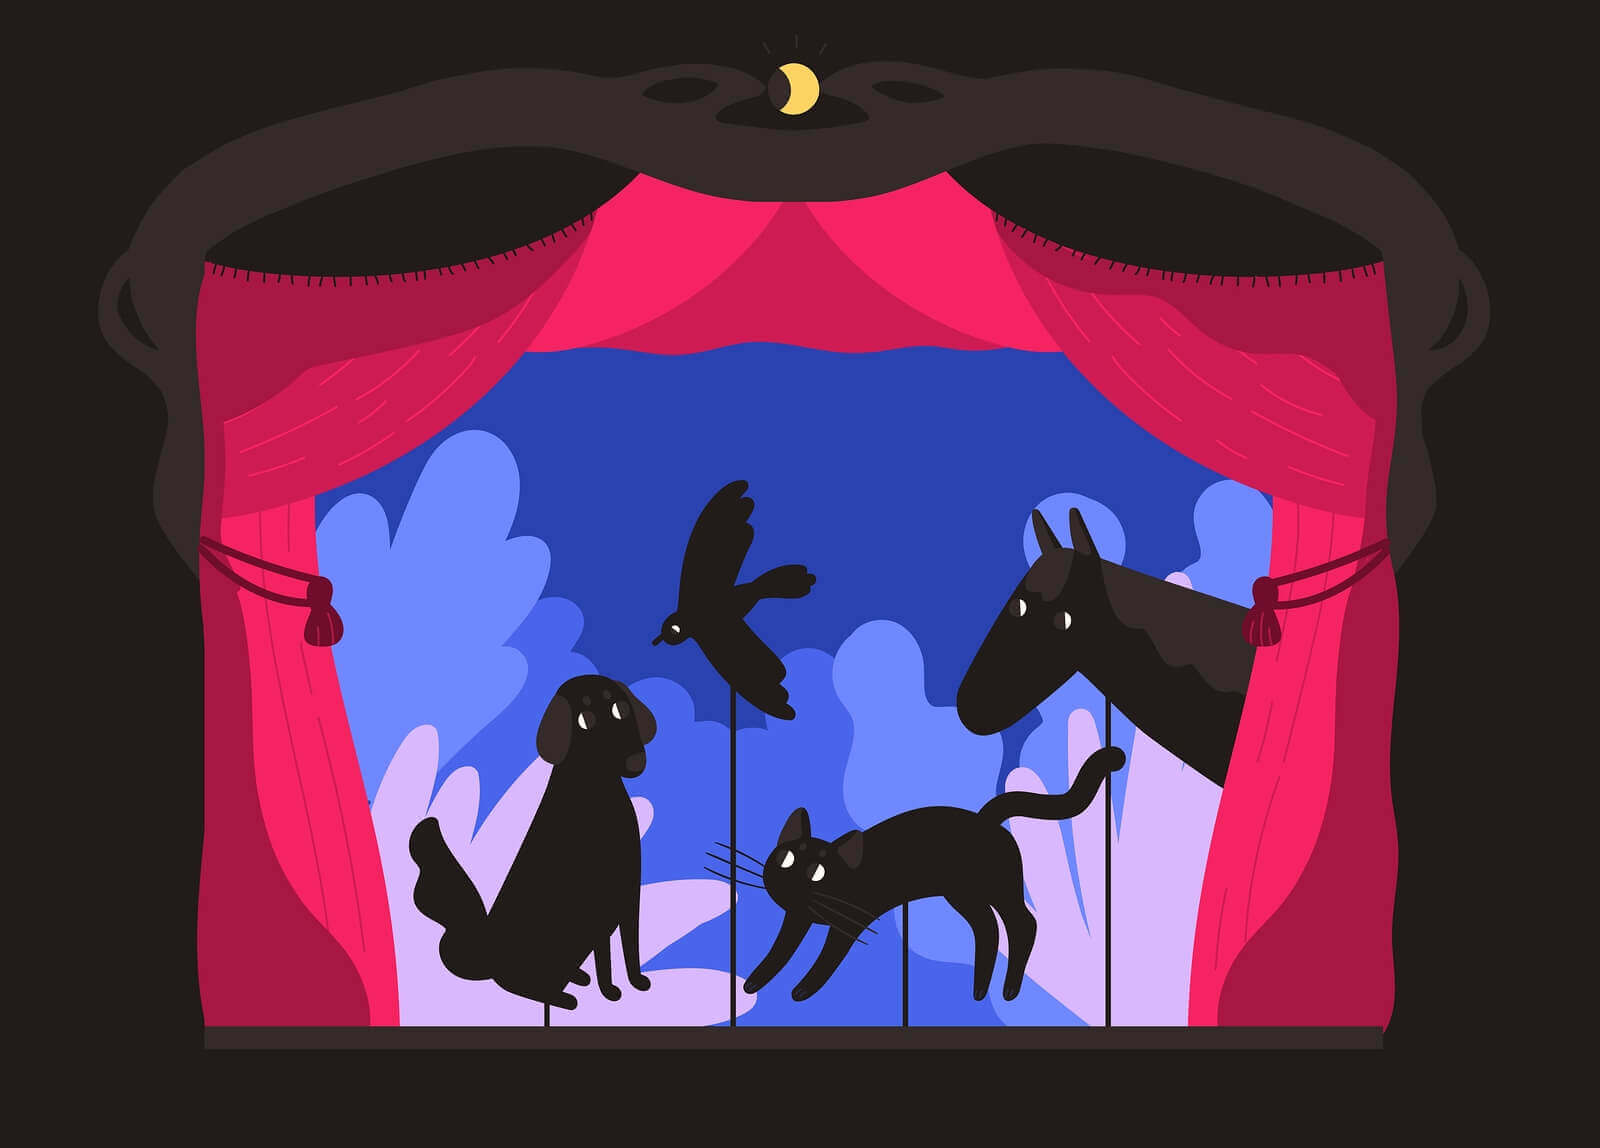 How to make a shadow puppet theater.